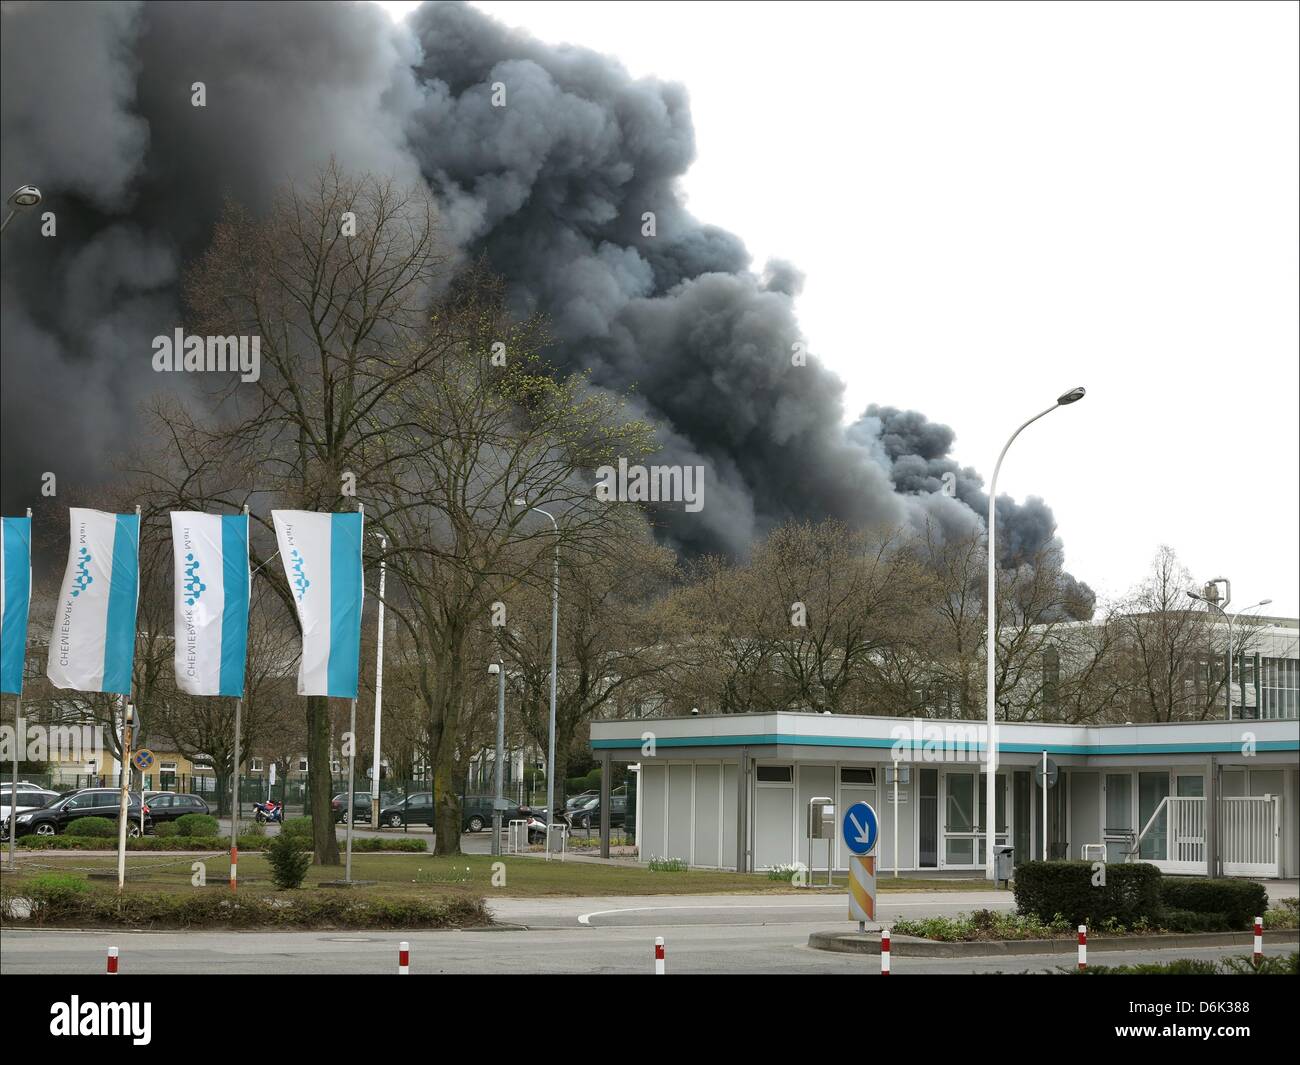 Dark clouds of smoke rise up after an explosion at the Chemical Park in Marl, Germany, 31 March 2012. The cause of the explosion is still unknown. Photo: PHIL GRIFFIN Stock Photo